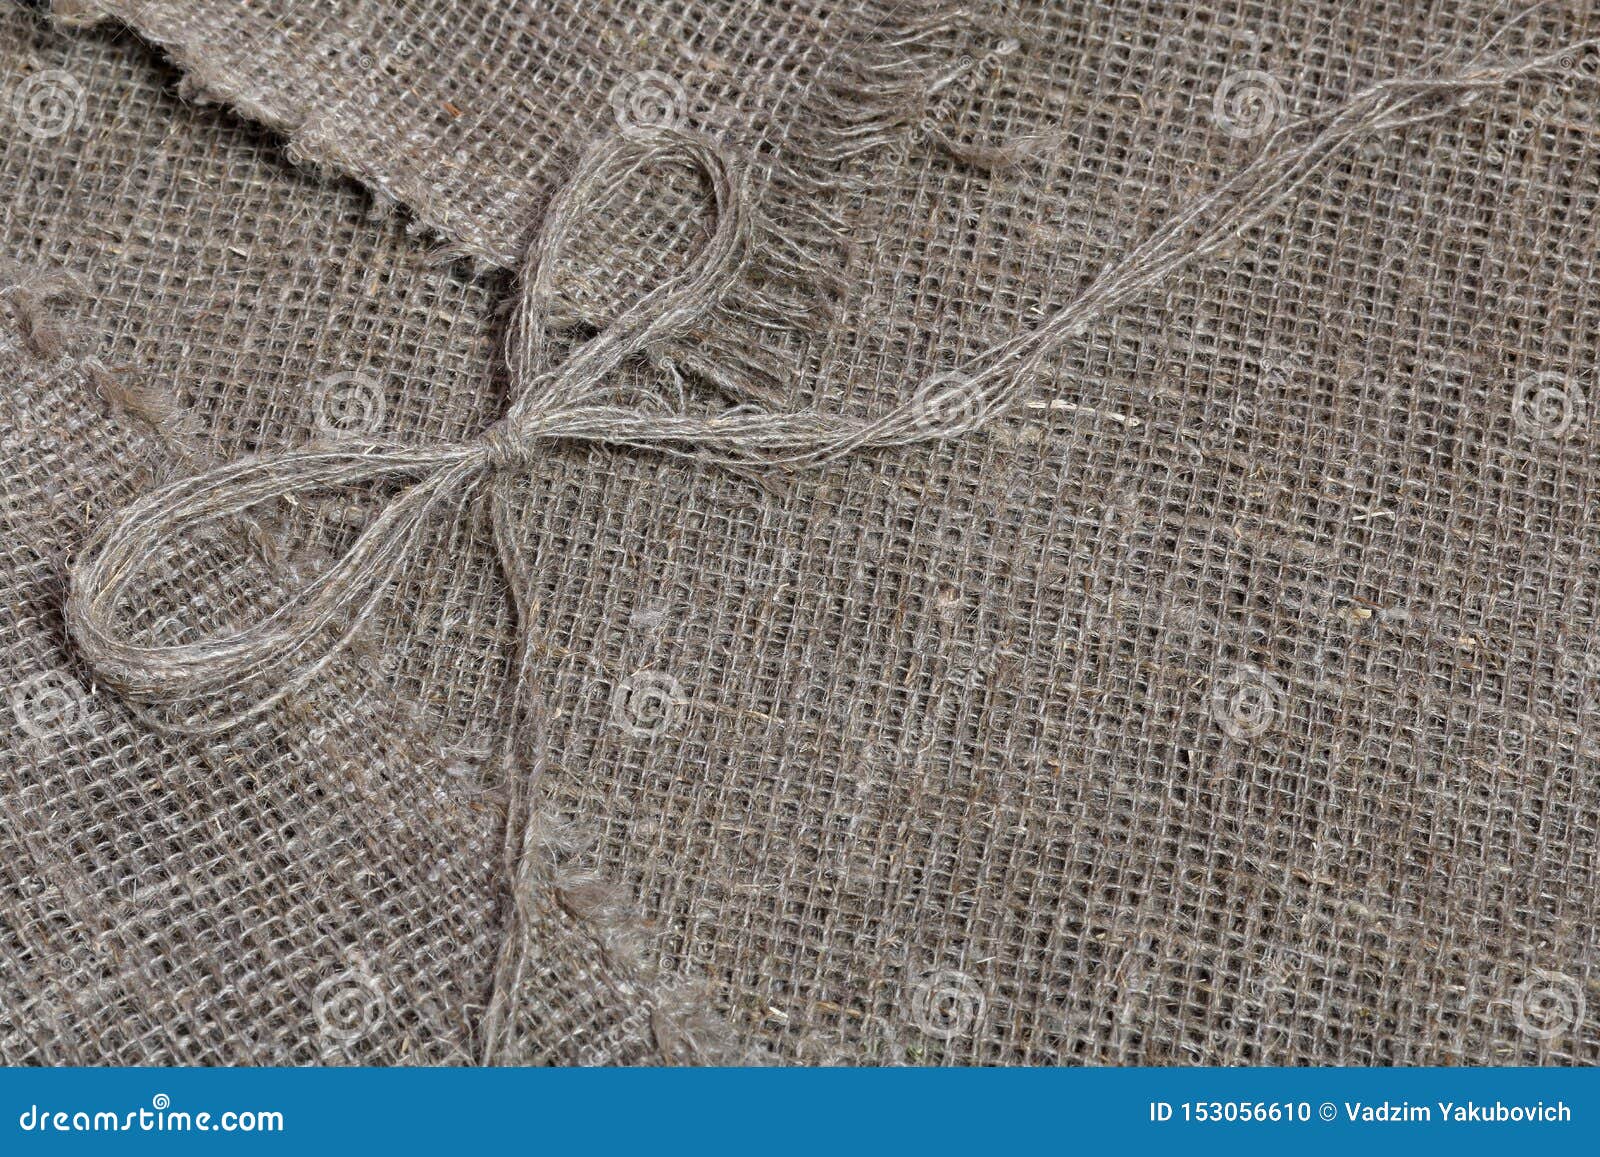 Coarse Linen Fabric. on it Lies a Bow of Linen Thread Stock Photo ...